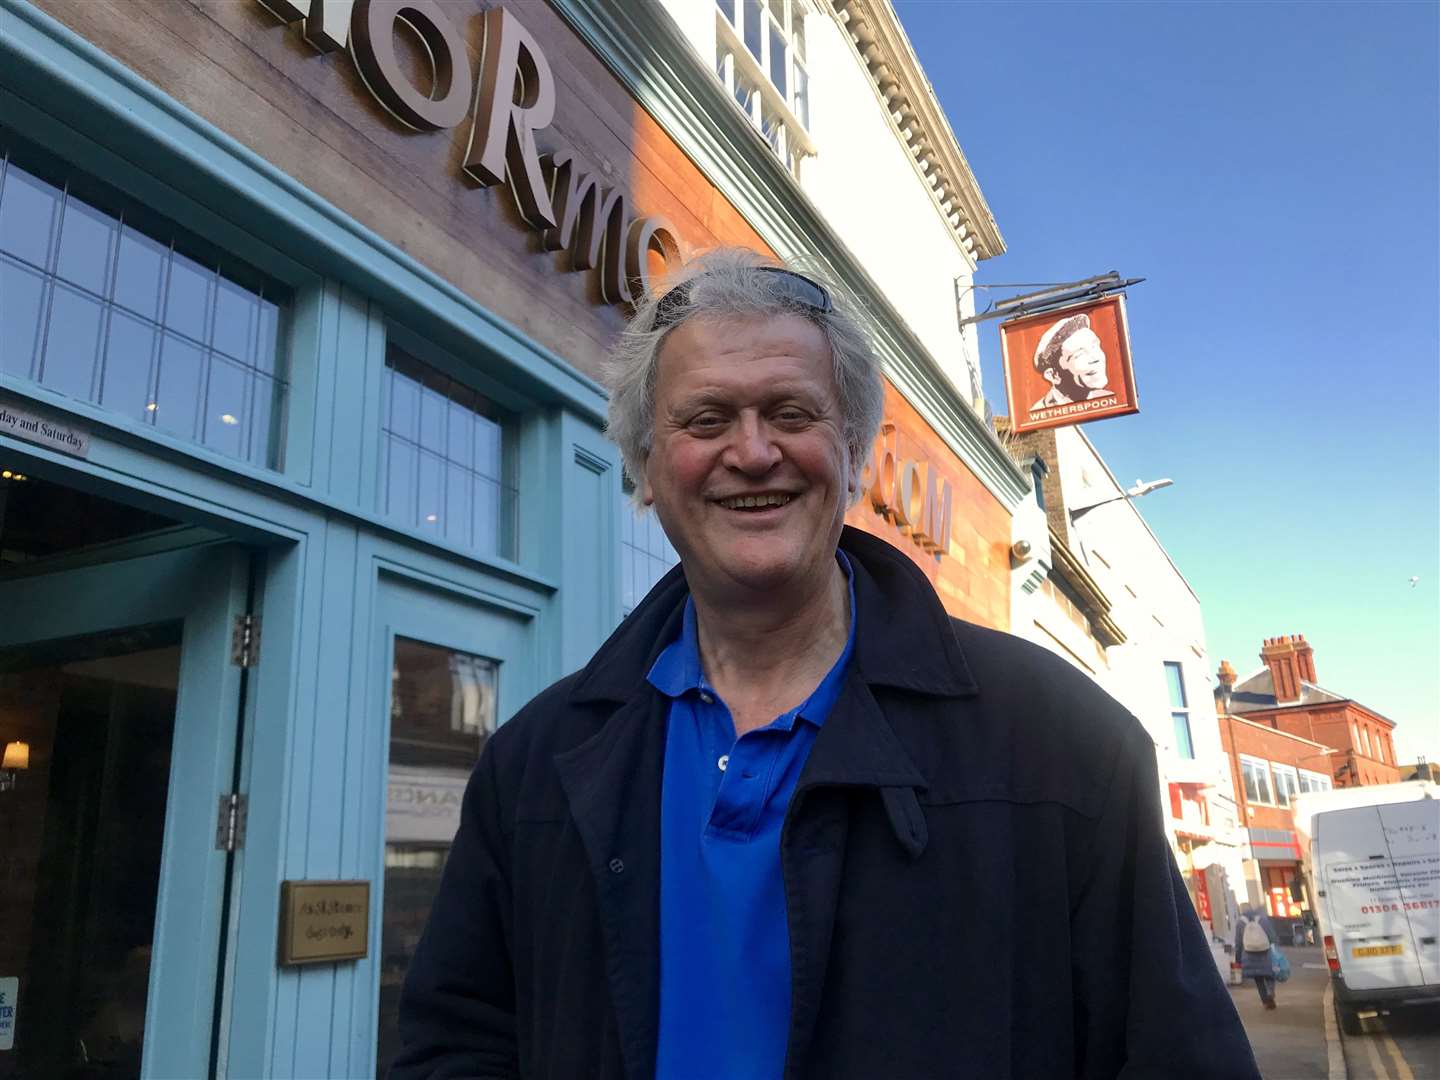 JD Wetherspoon founder Tim Martin, pictured outside the Sir Norman Wisdom in Deal, played a key role in devising the strategy